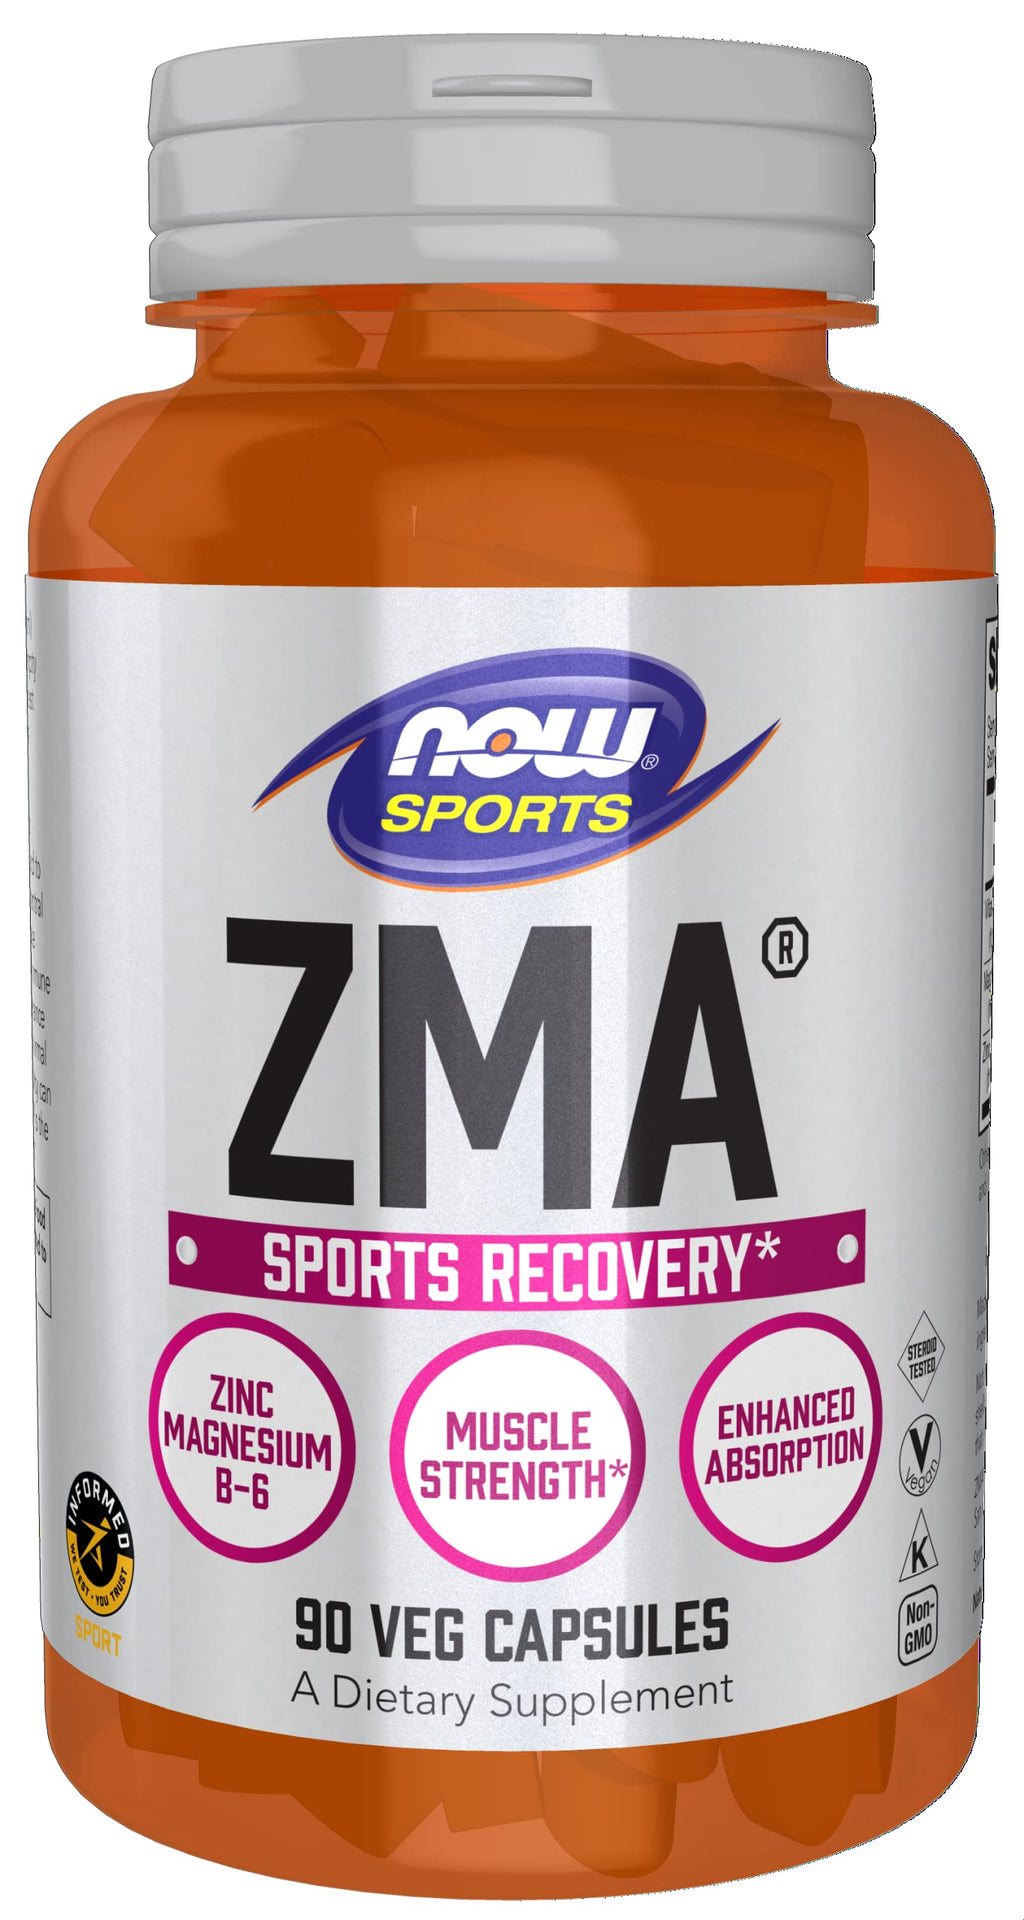 [Australia] - NOW Sports Nutrition, ZMA (Zinc, Magnesium and Vitamin B-6), Enhanced Absorption, Sports Recovery*, 90 Capsules 